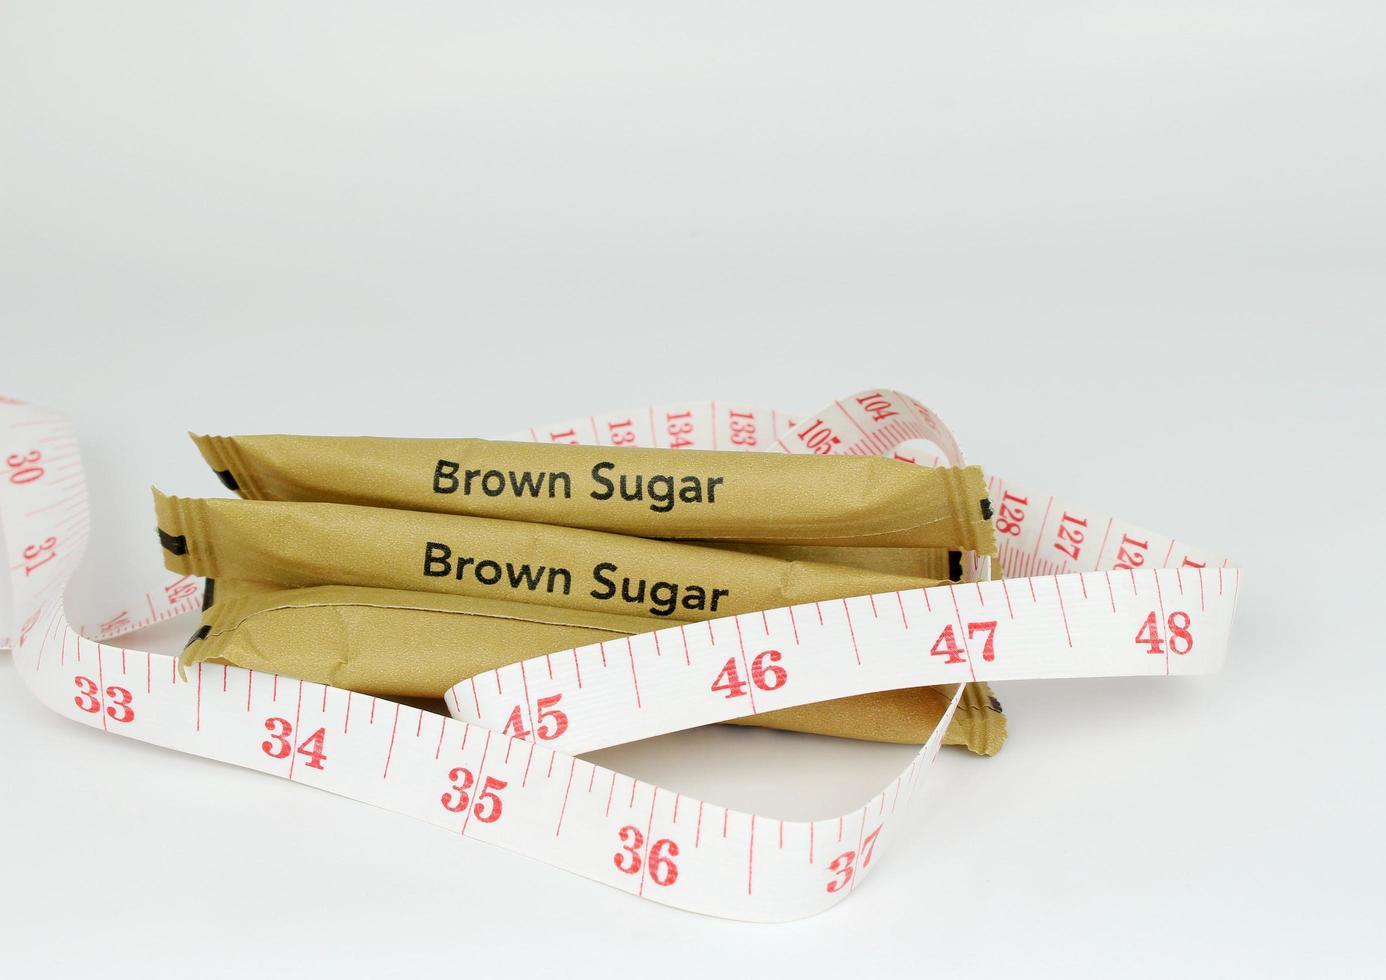 Sugar packets and measuring tape photo